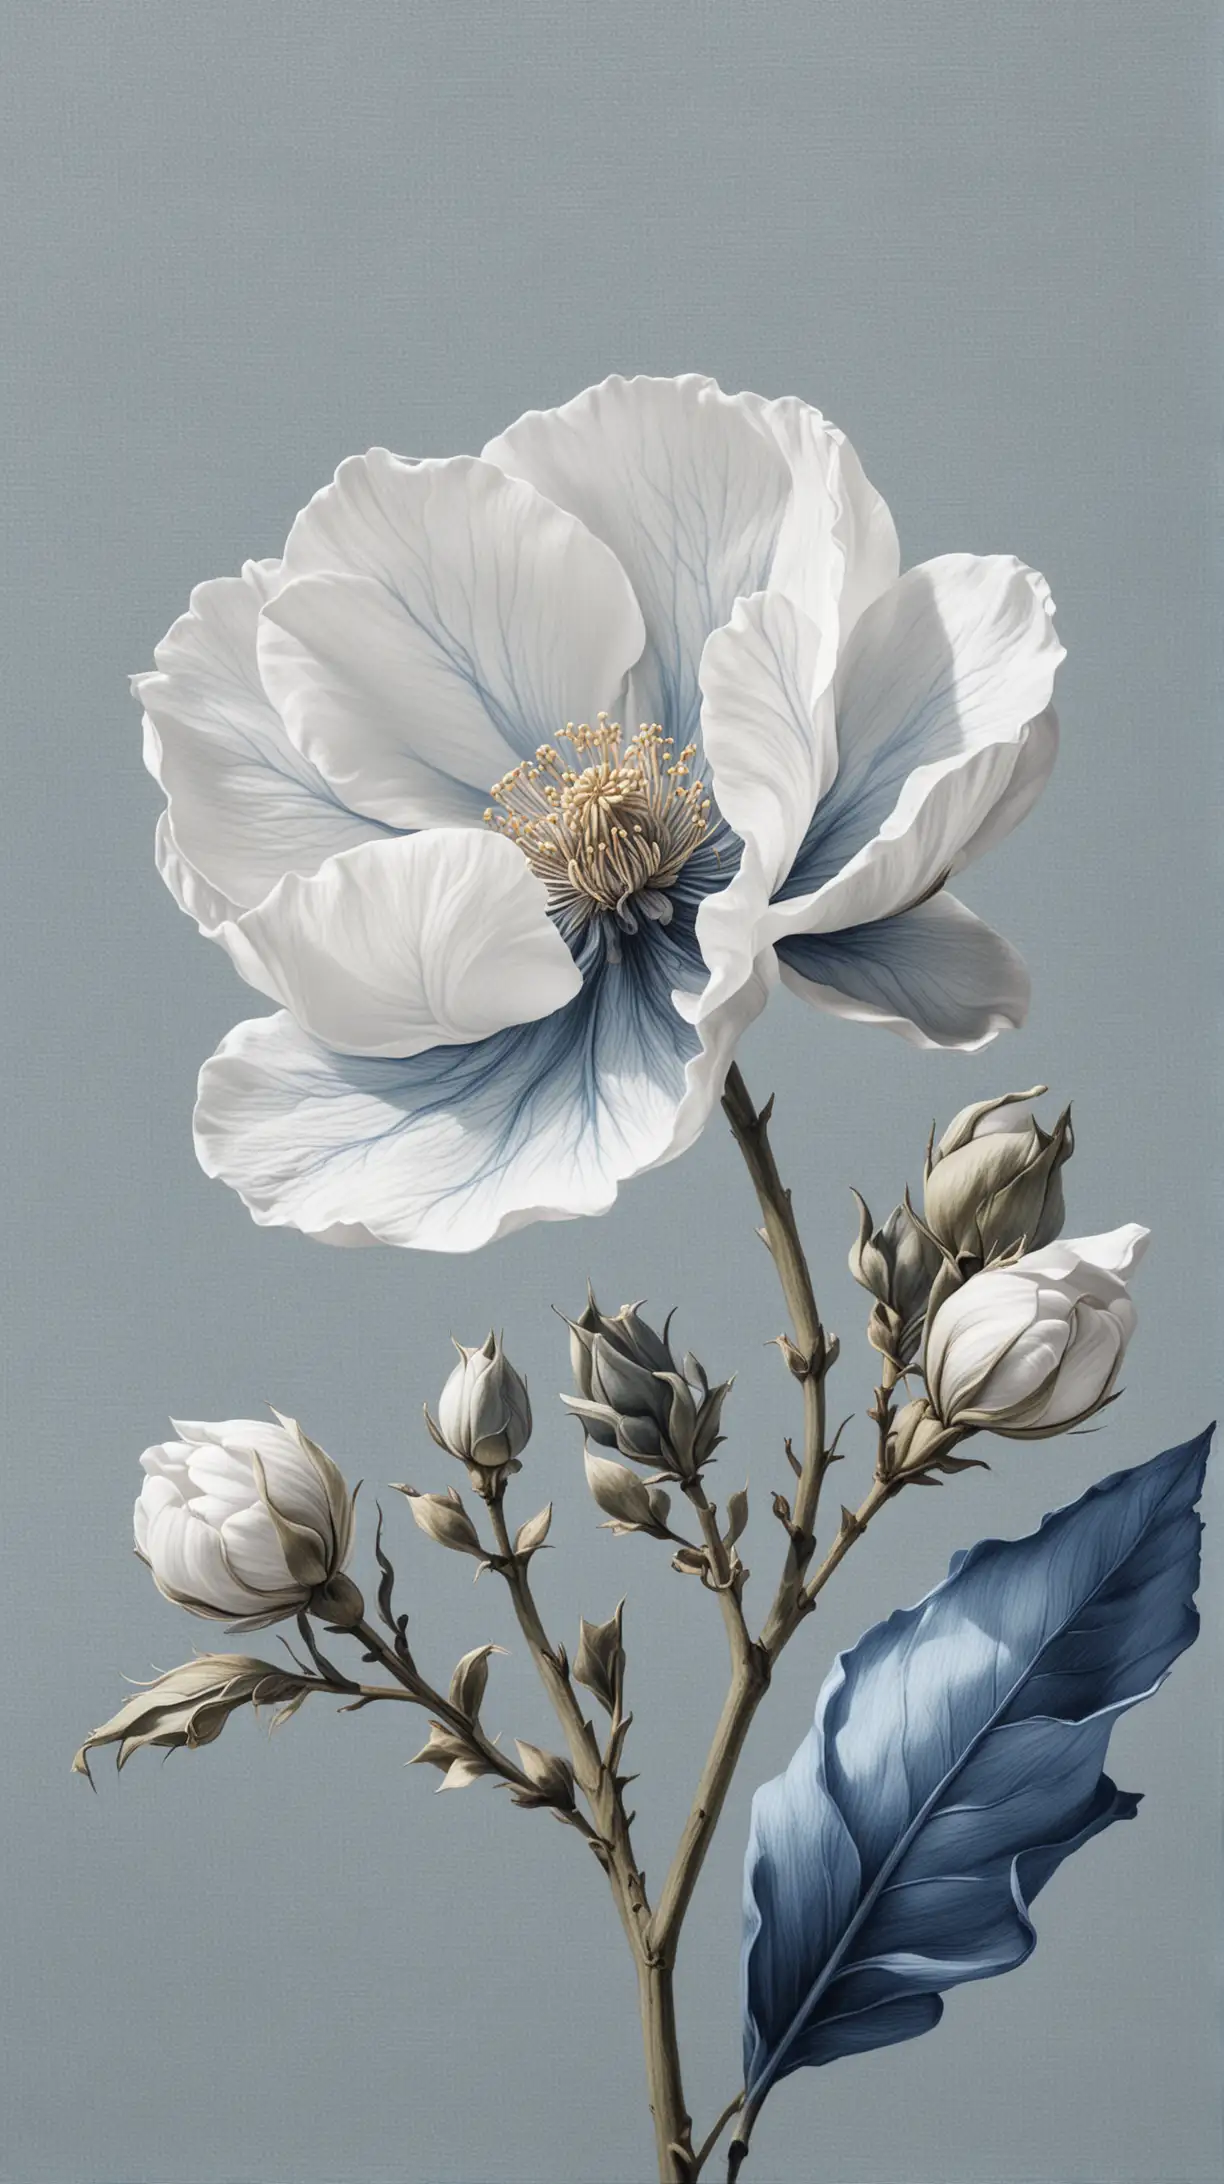 Illustrated Cotton Flower with White and Blue Details